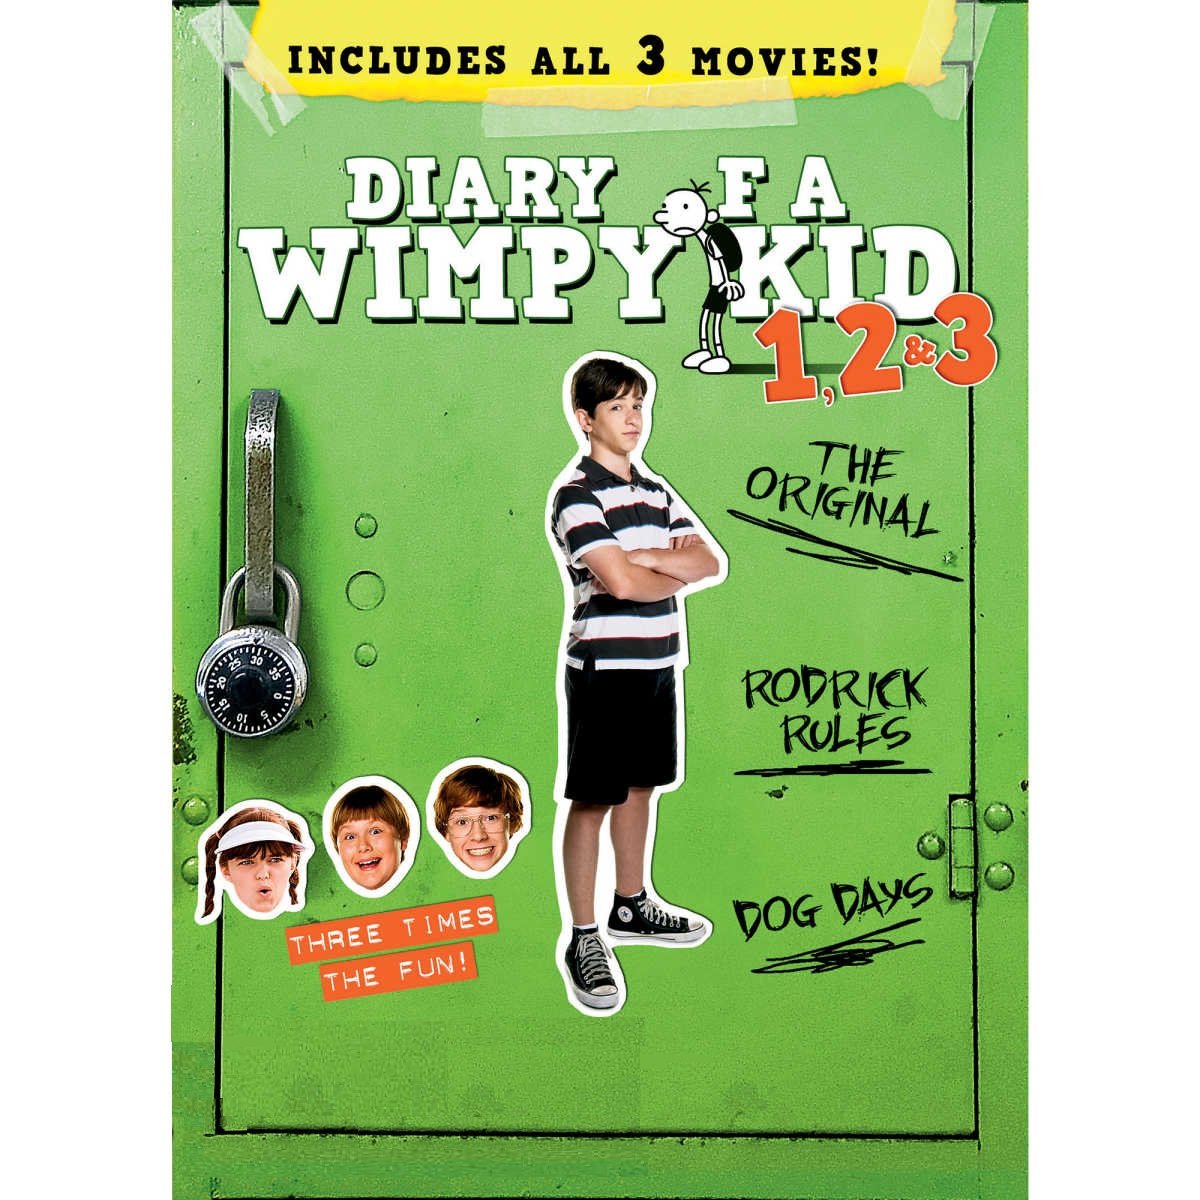 diary-of-a-wimpy-kid-1-2-3-the-original-rodrick-rules-dog-days